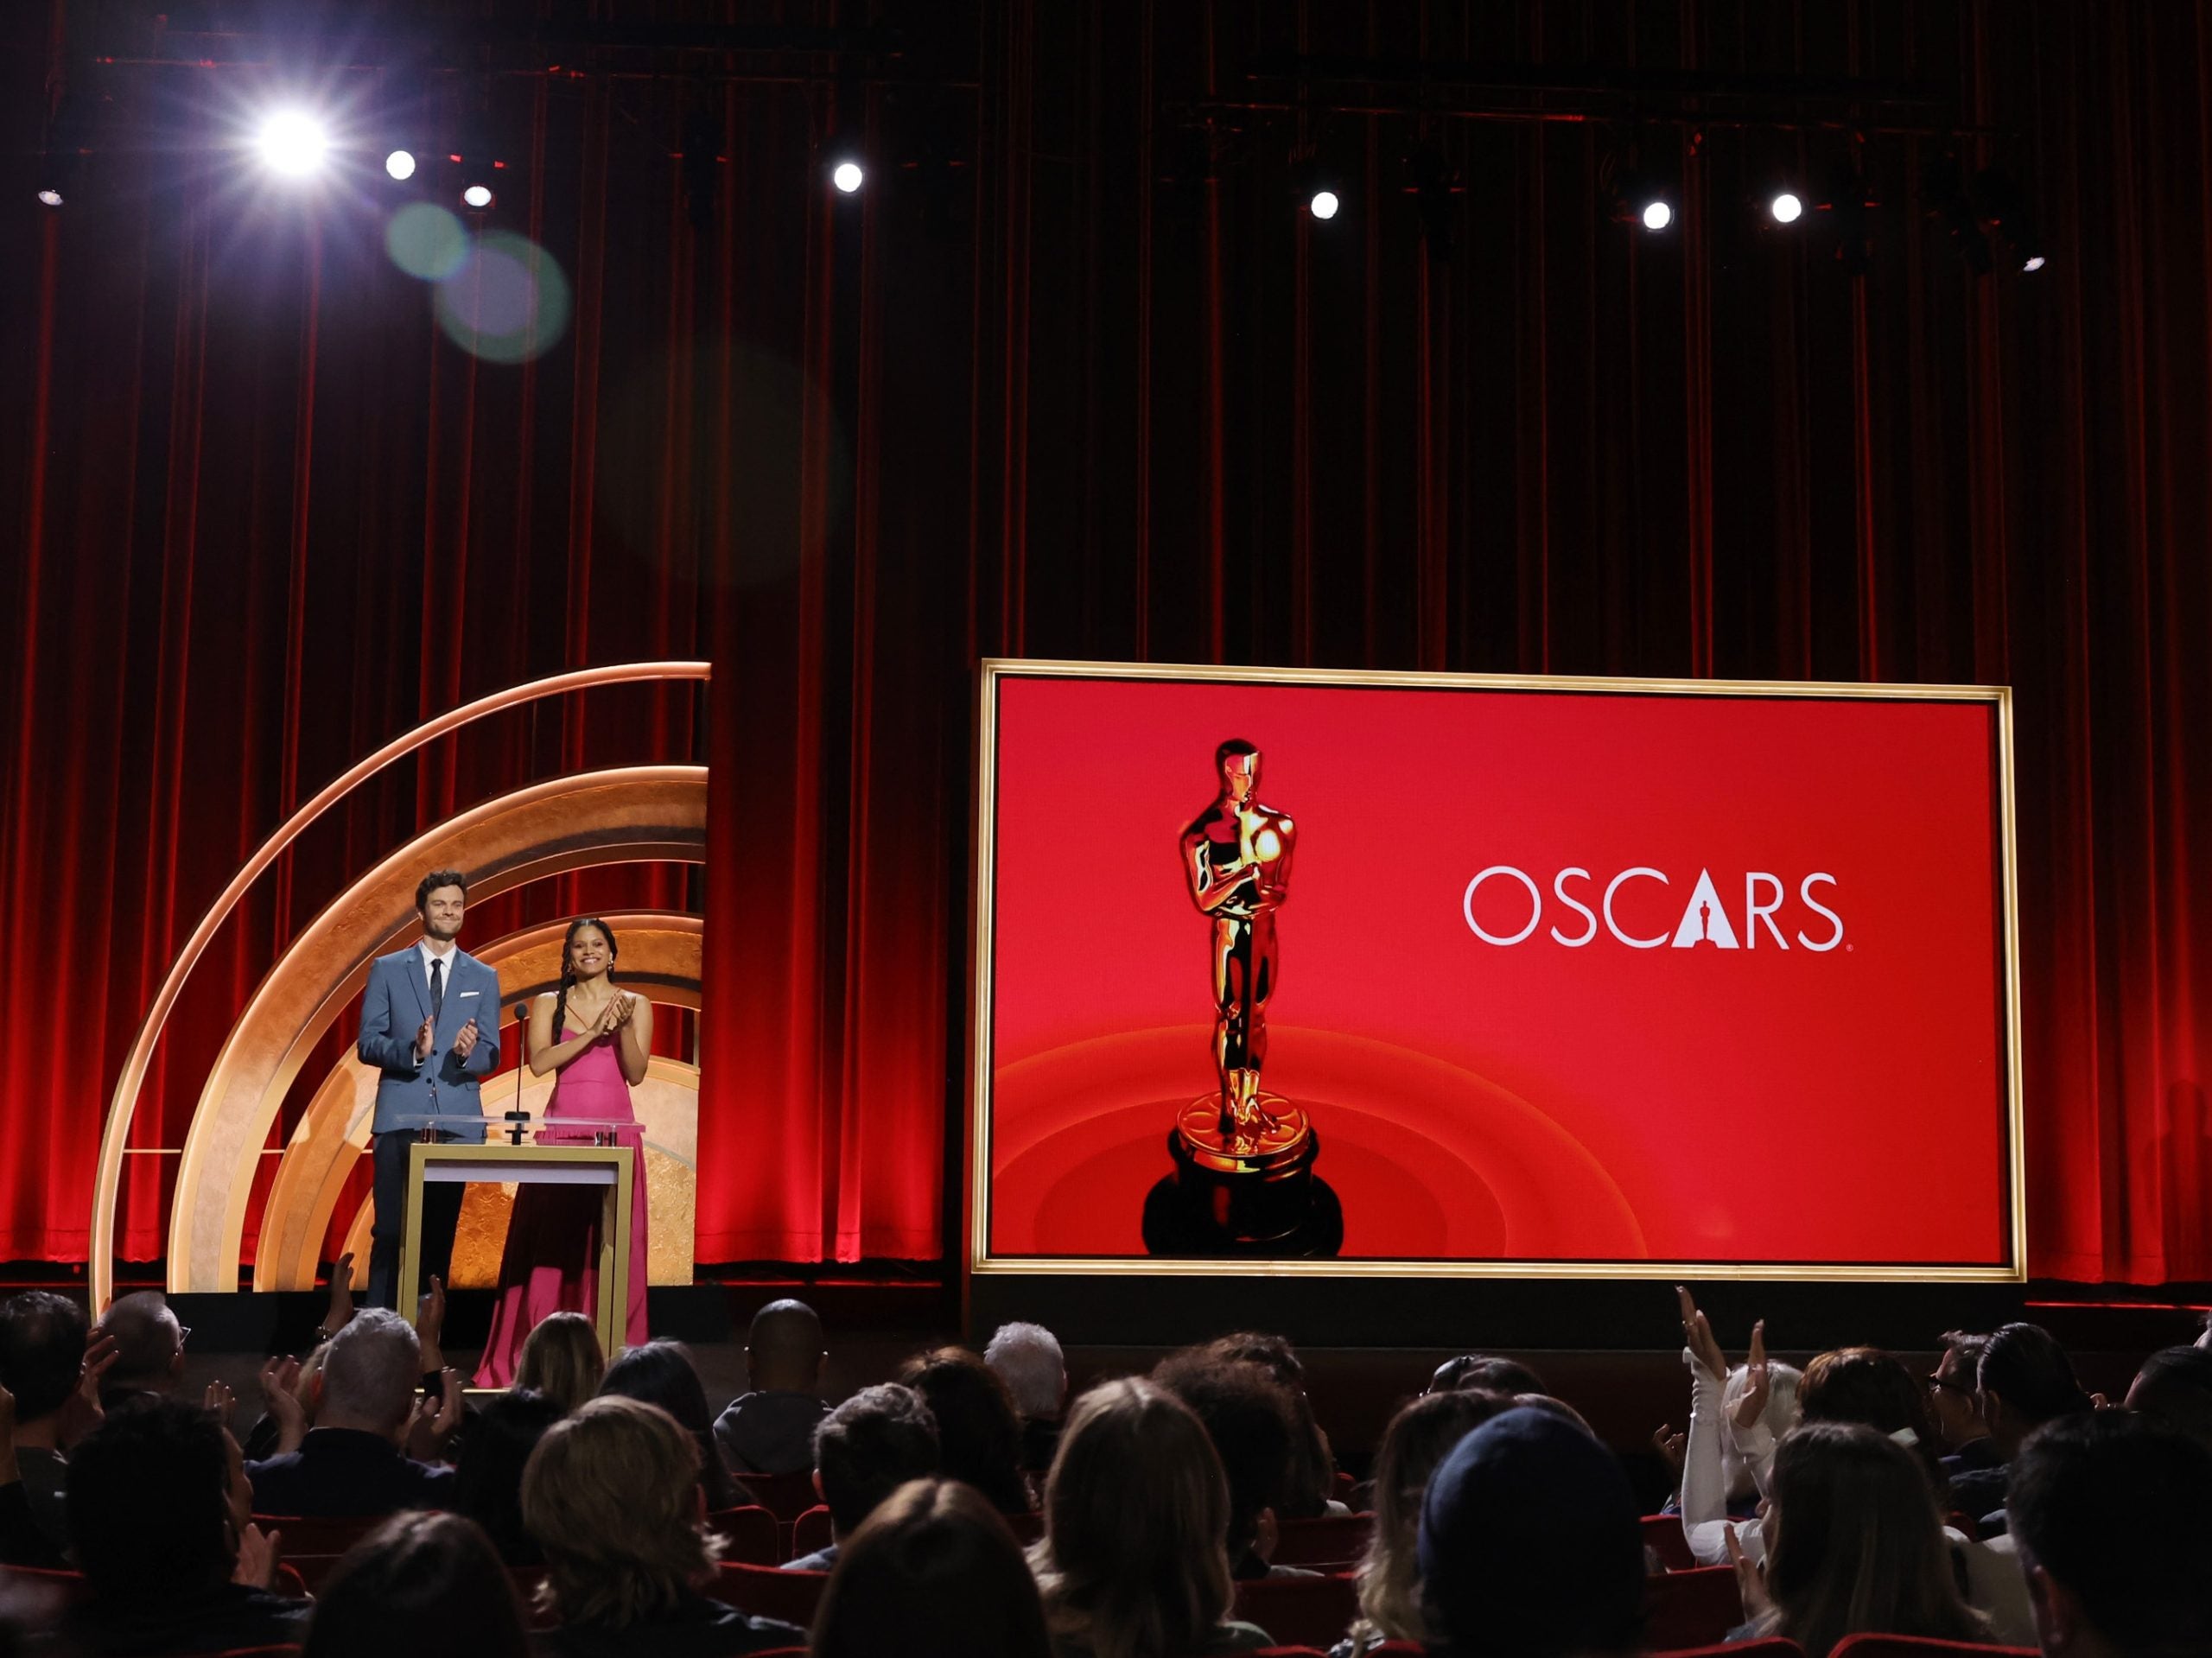 Here's The Full List Of Oscars Nominations